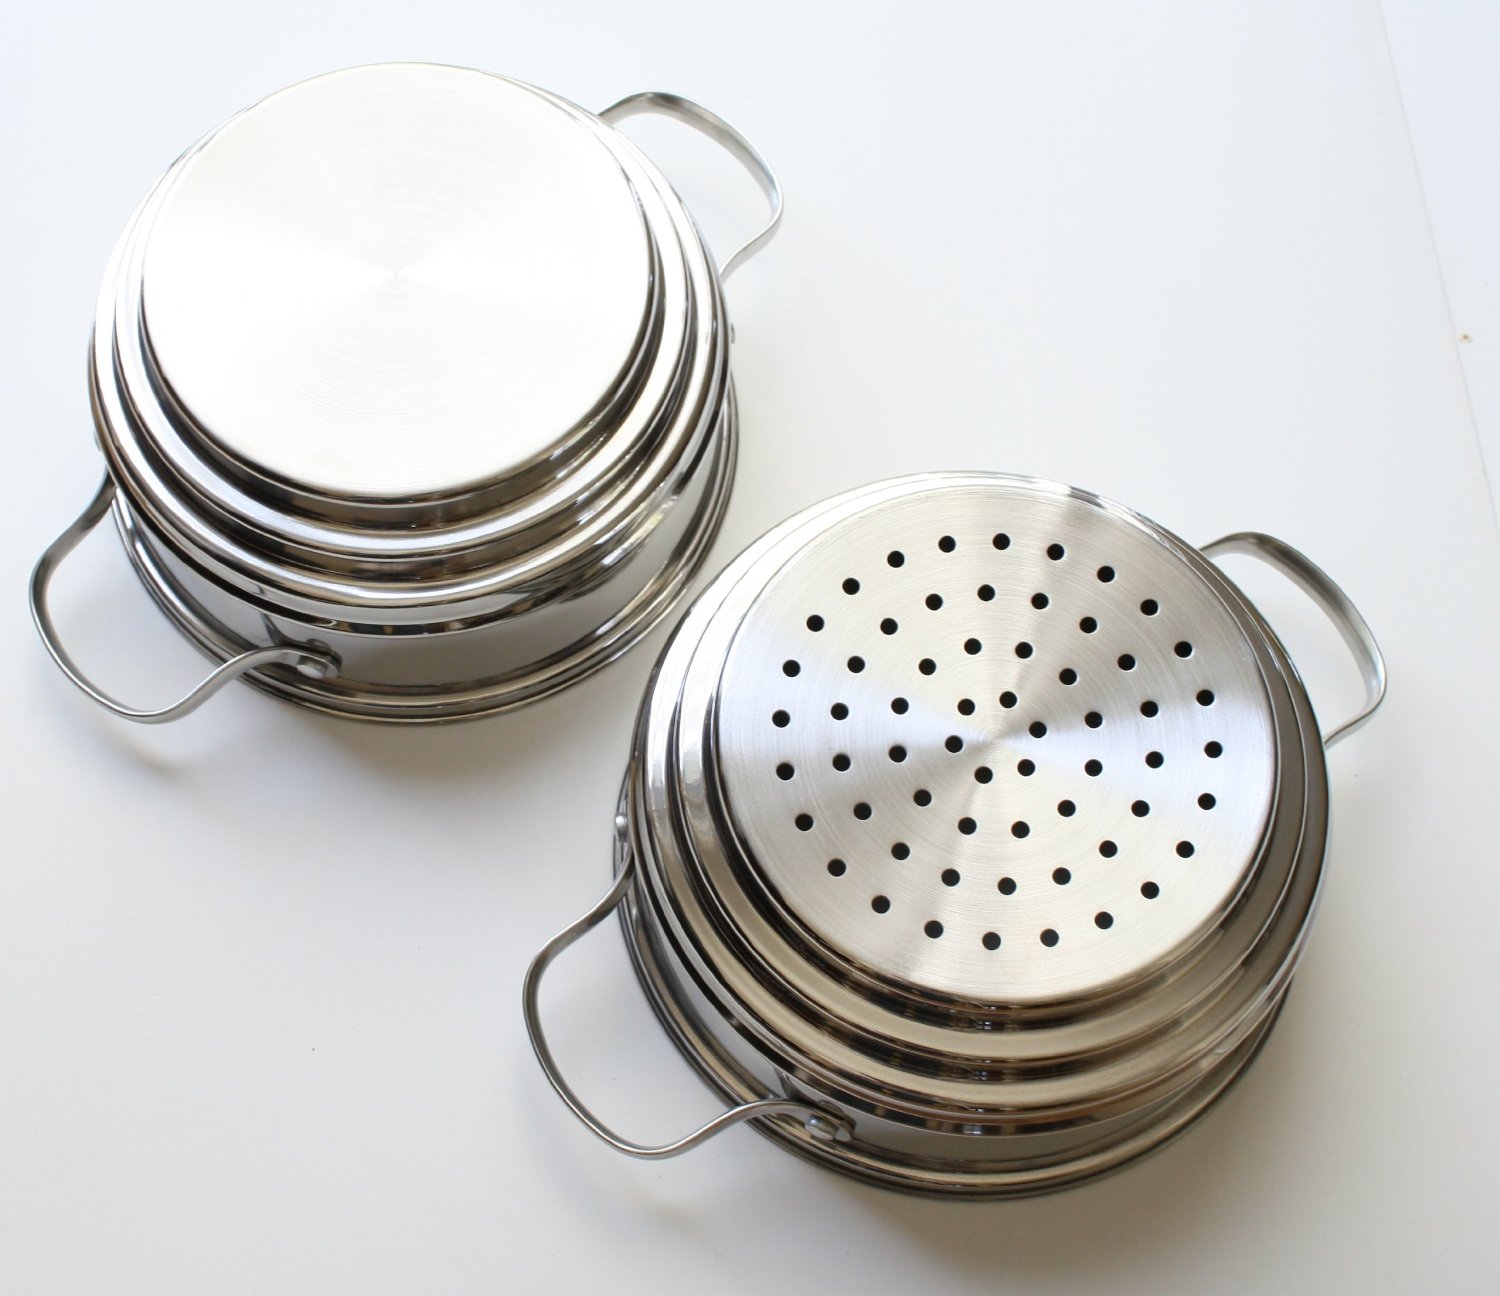 Cook N Home NC-00313 Double Boiler and Steamer Set, Stainless Steel